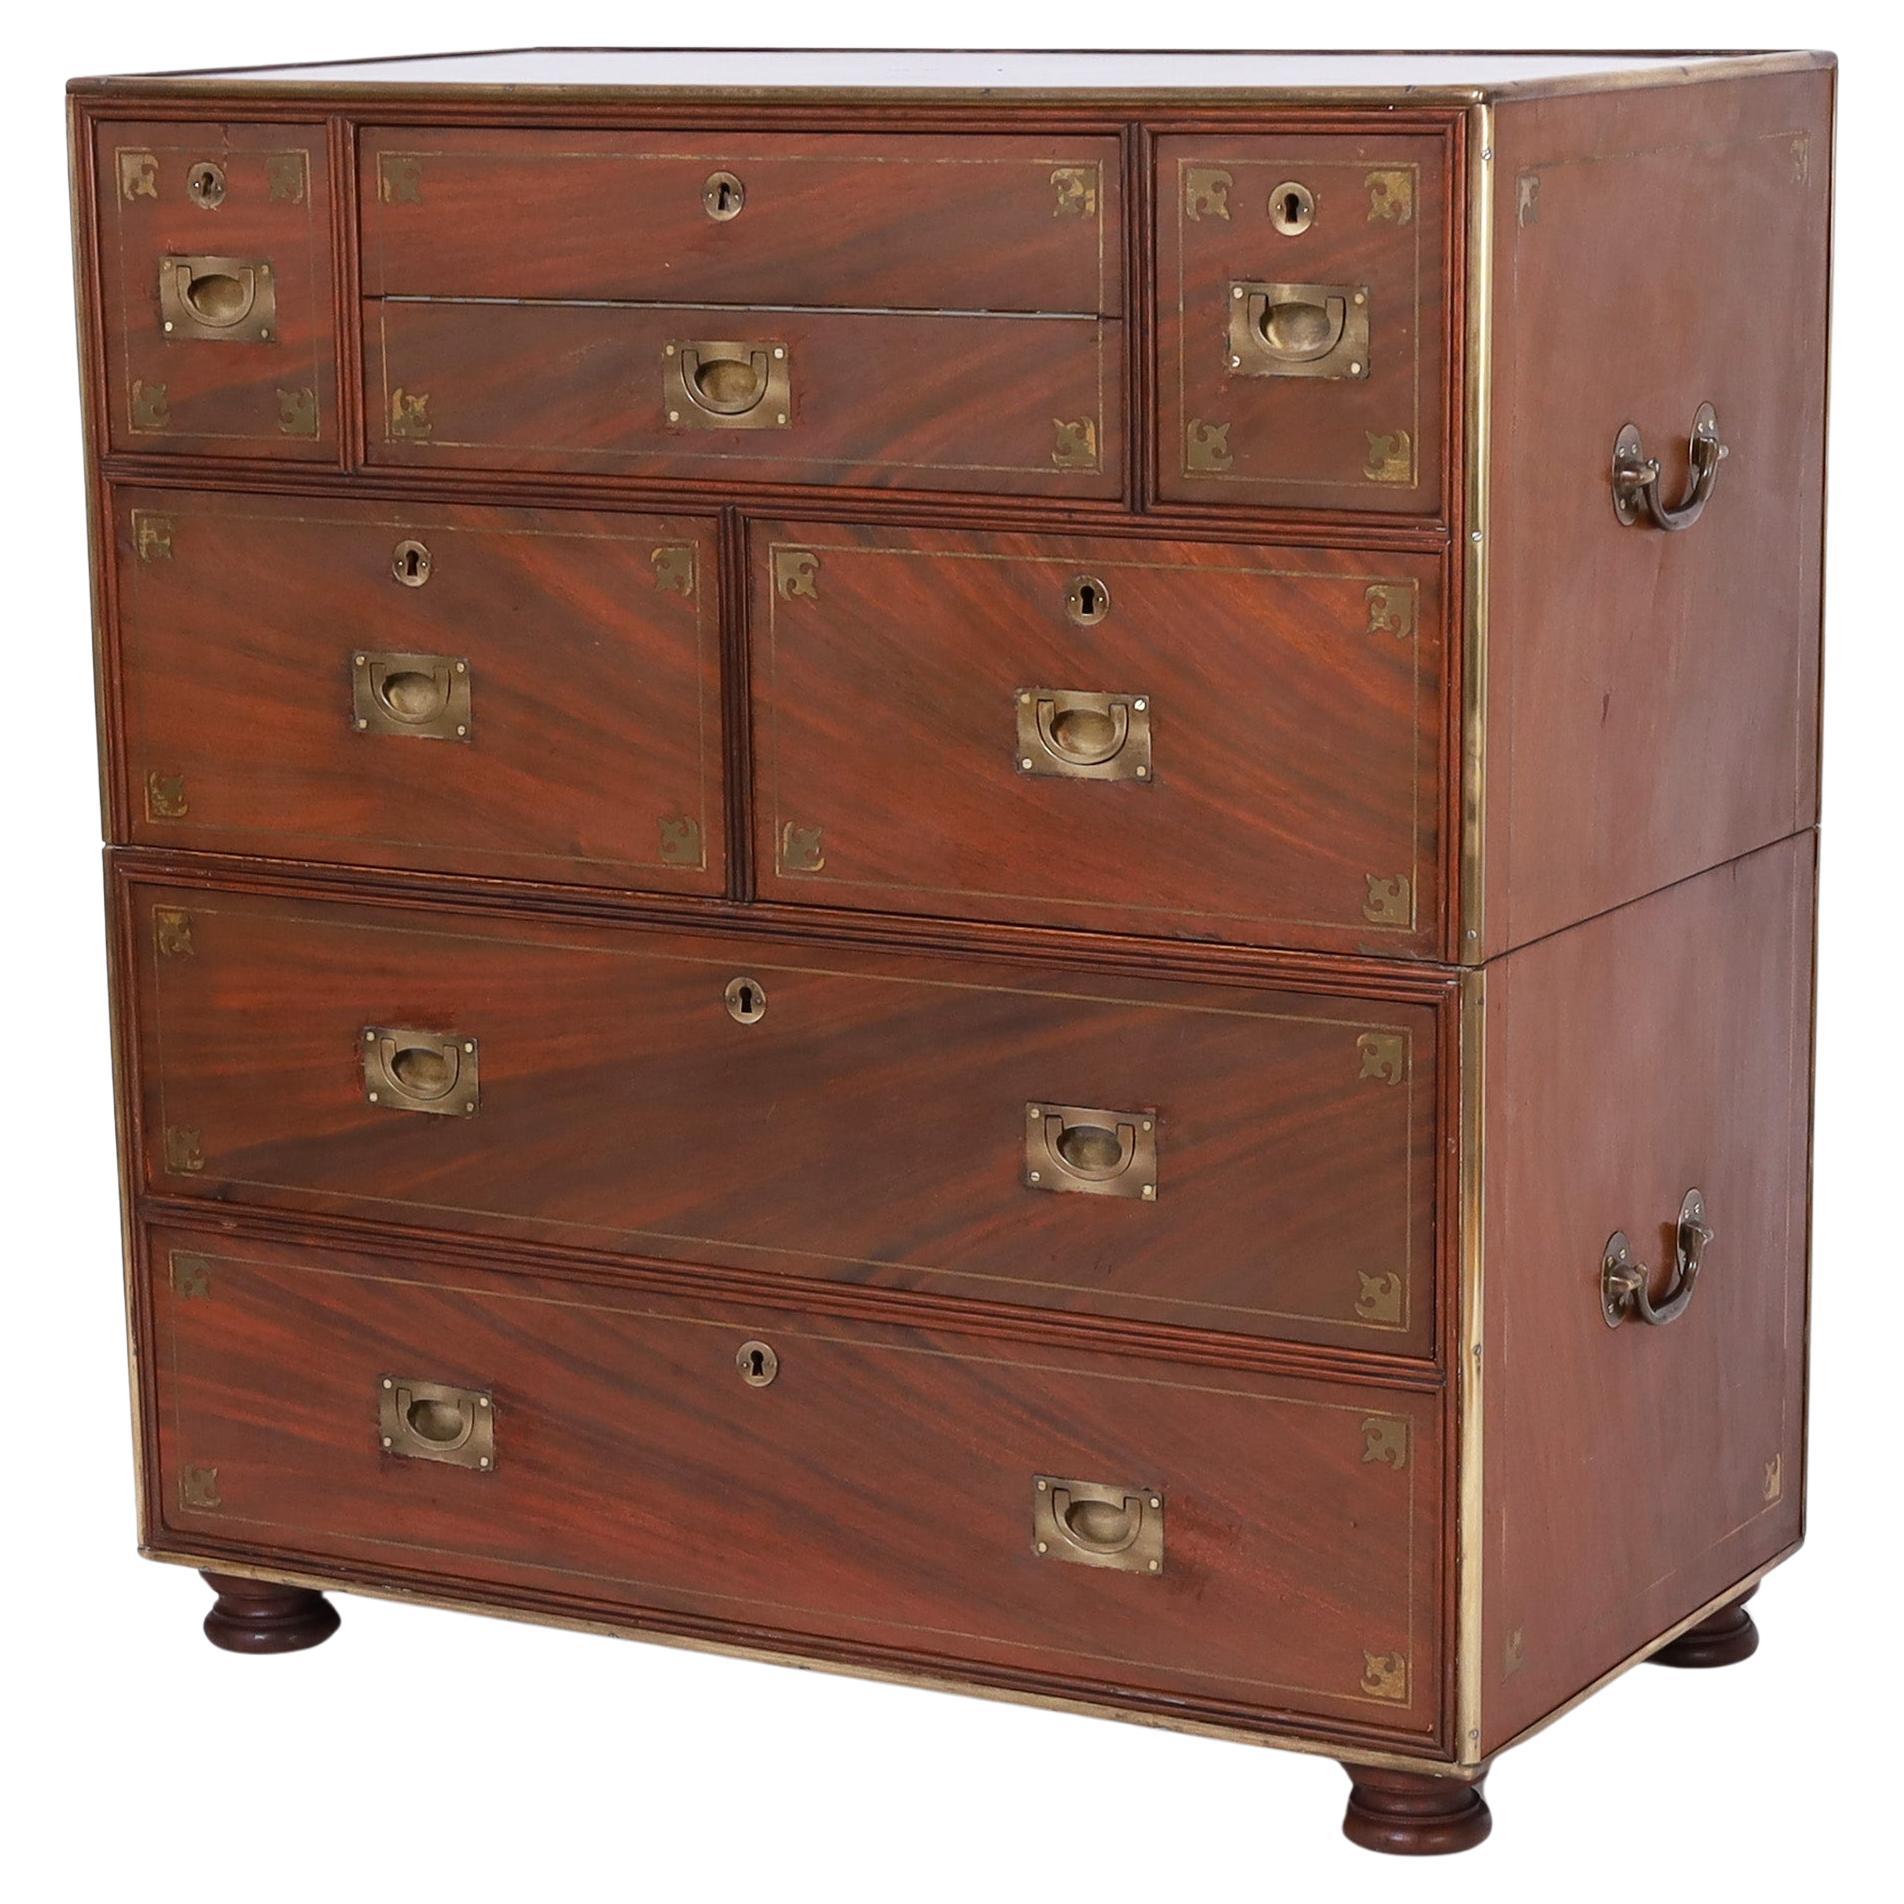 Antique Campaign Chest with Desk For Sale